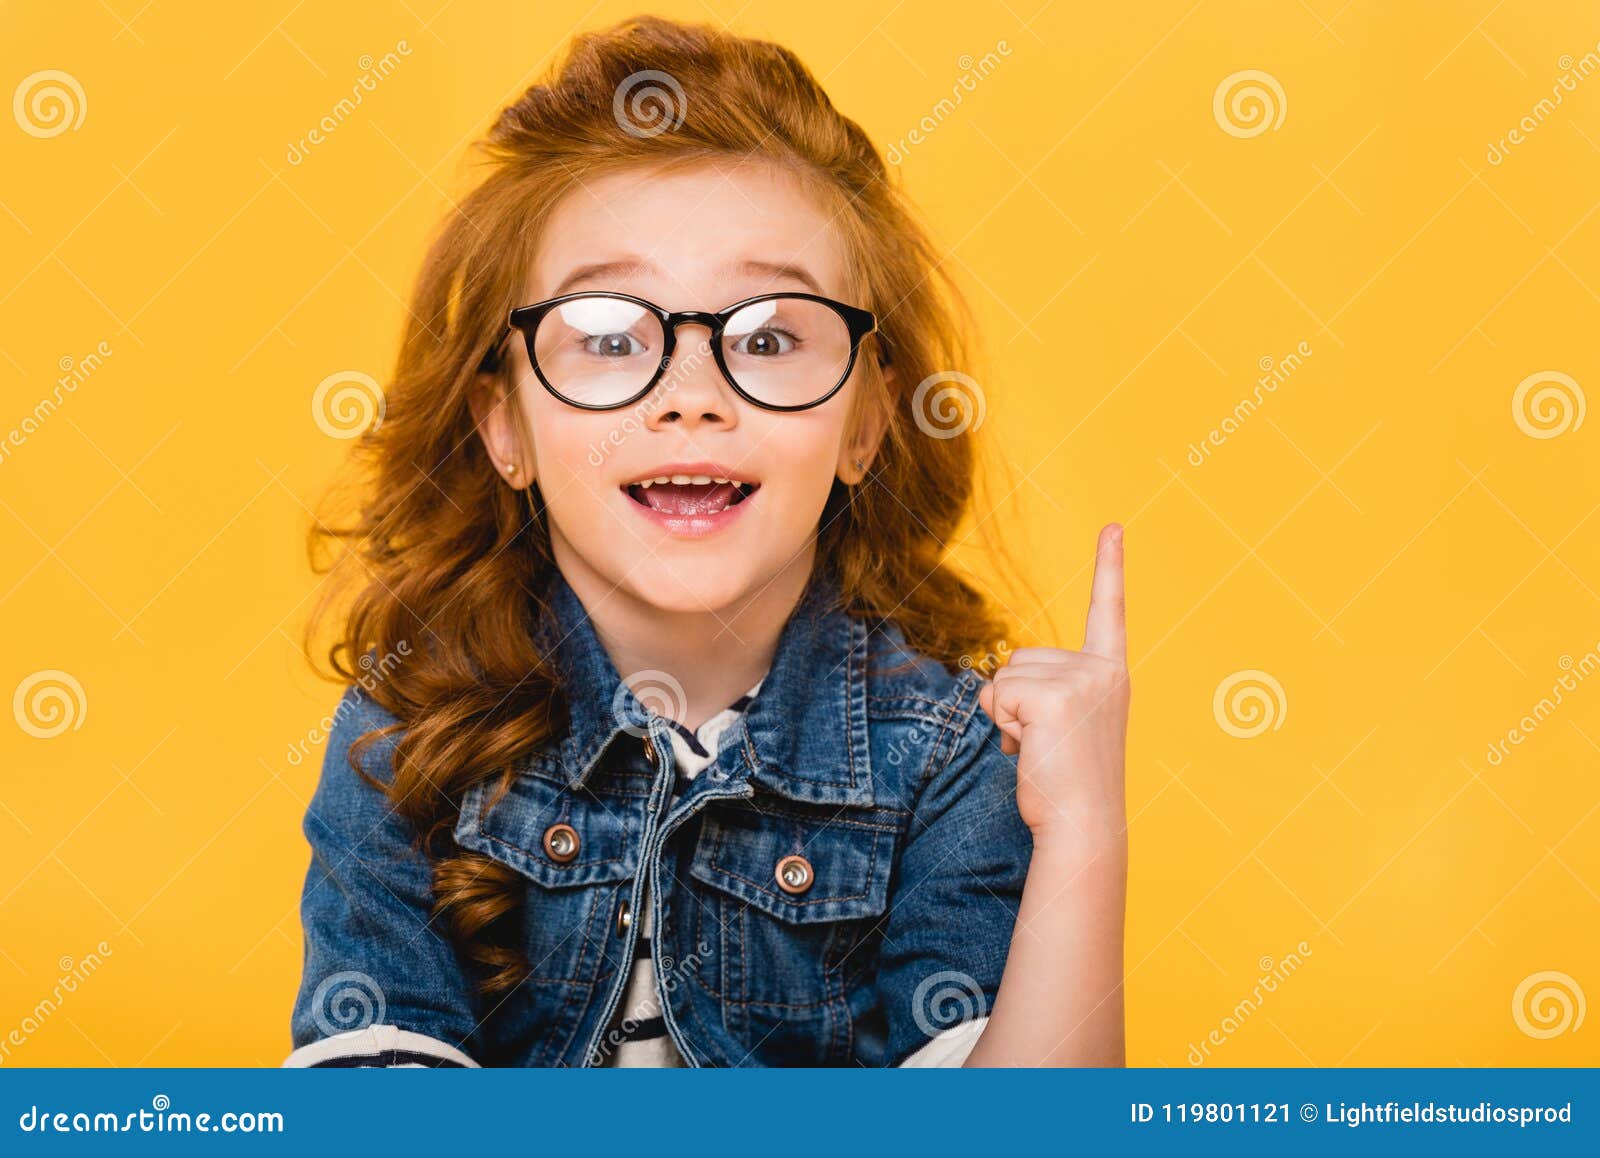 portrait of smiling little kid in eyeglasses pointing up